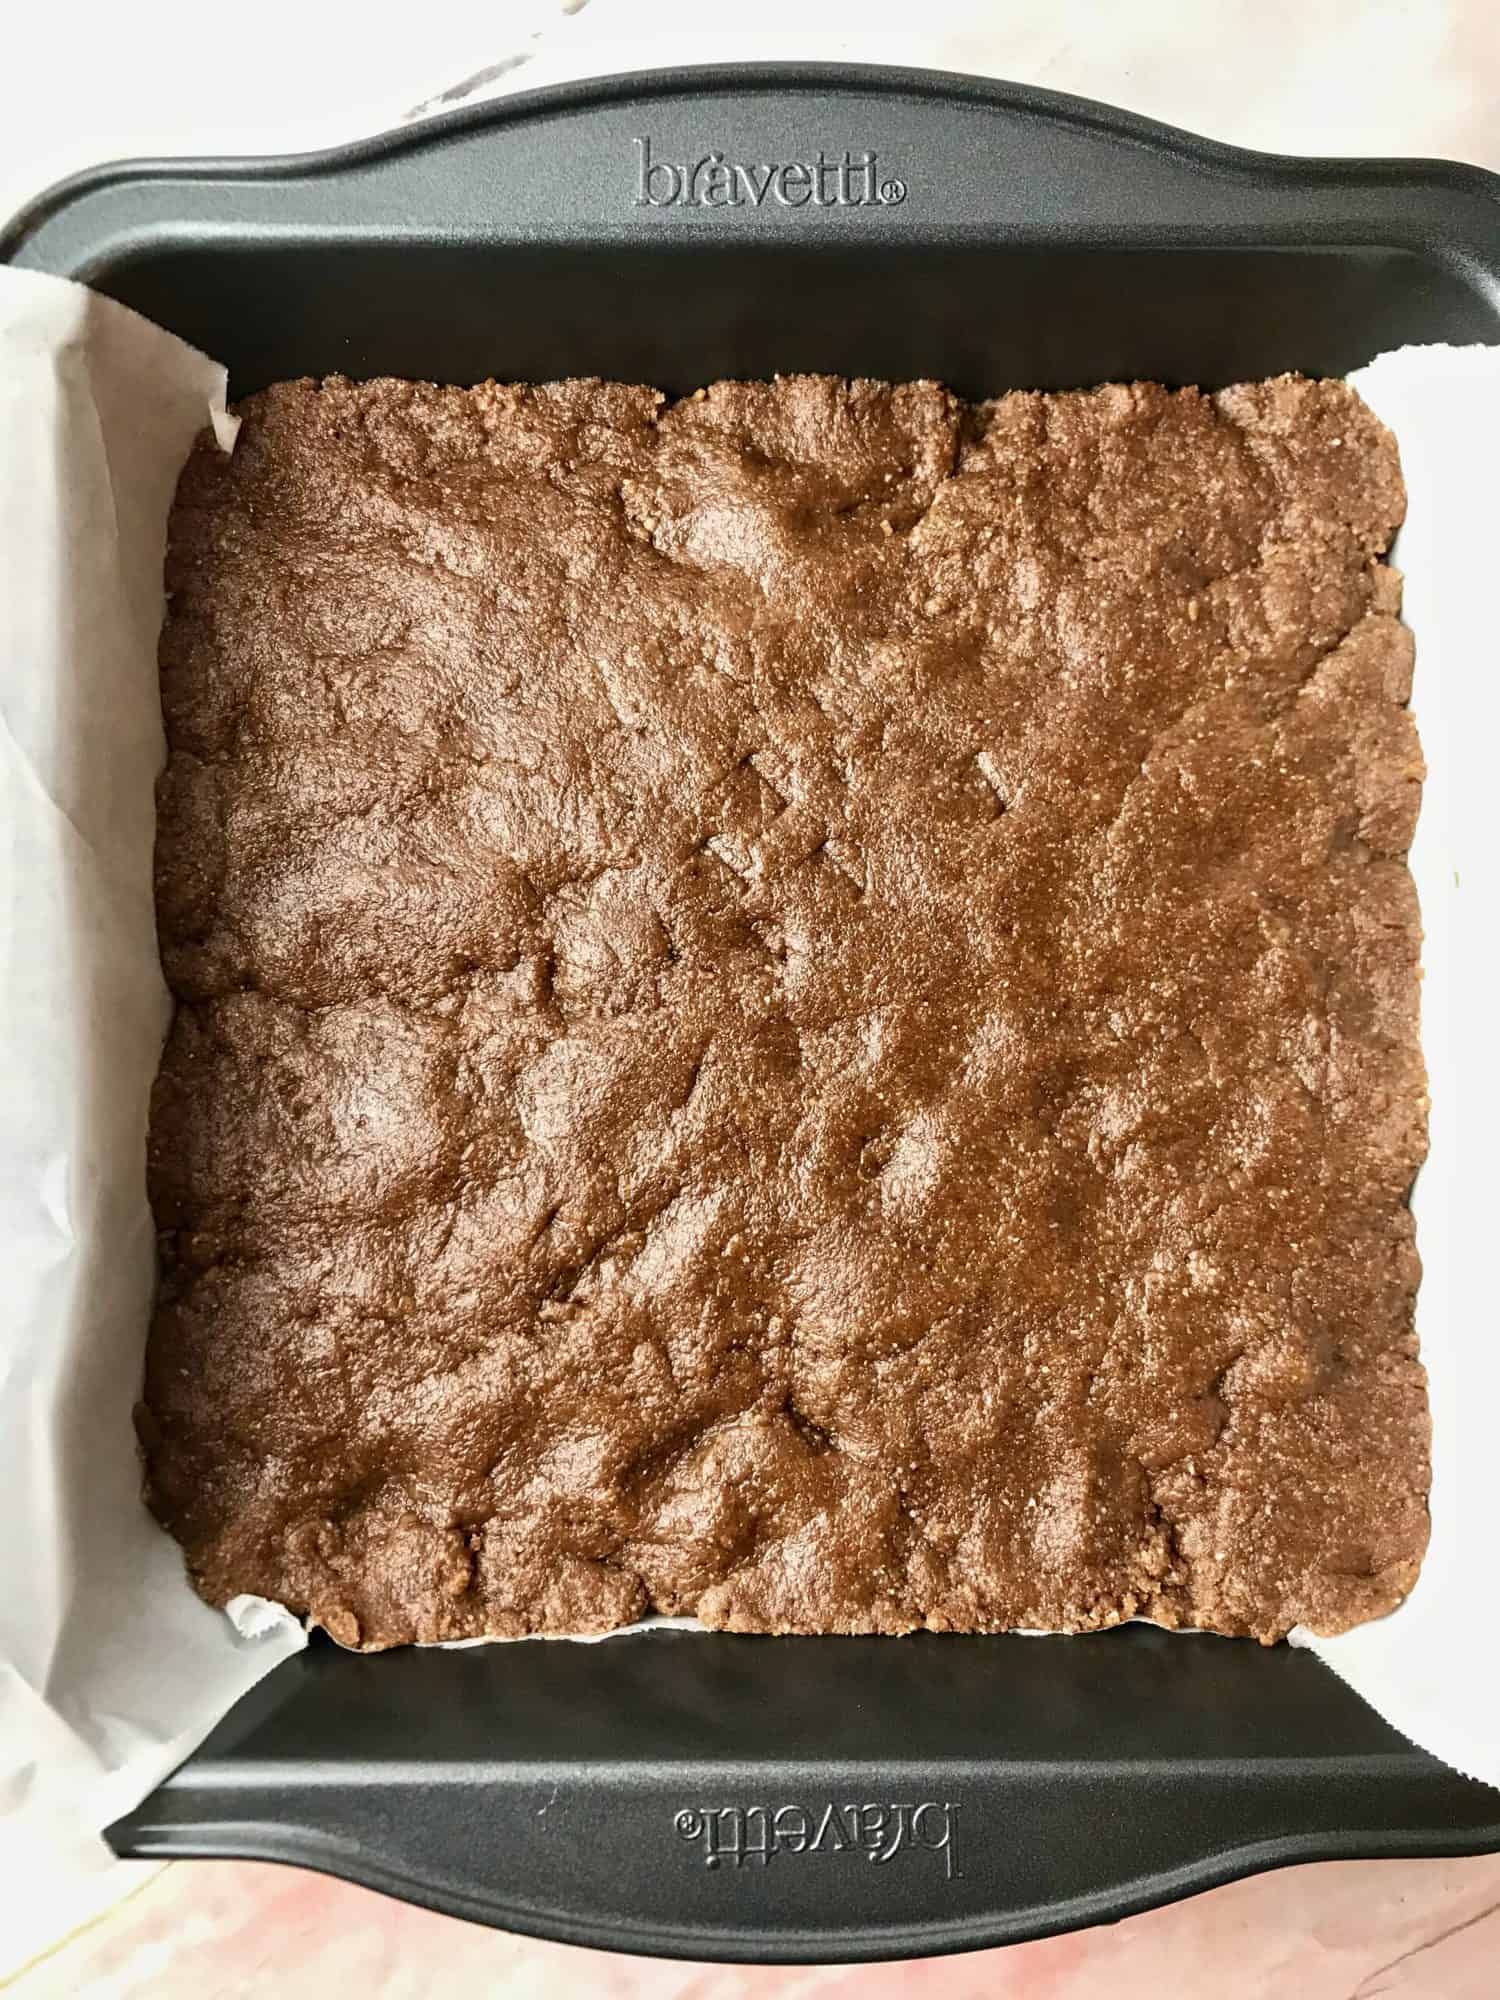 Chocolate almond bar mix pressed into a square pan.